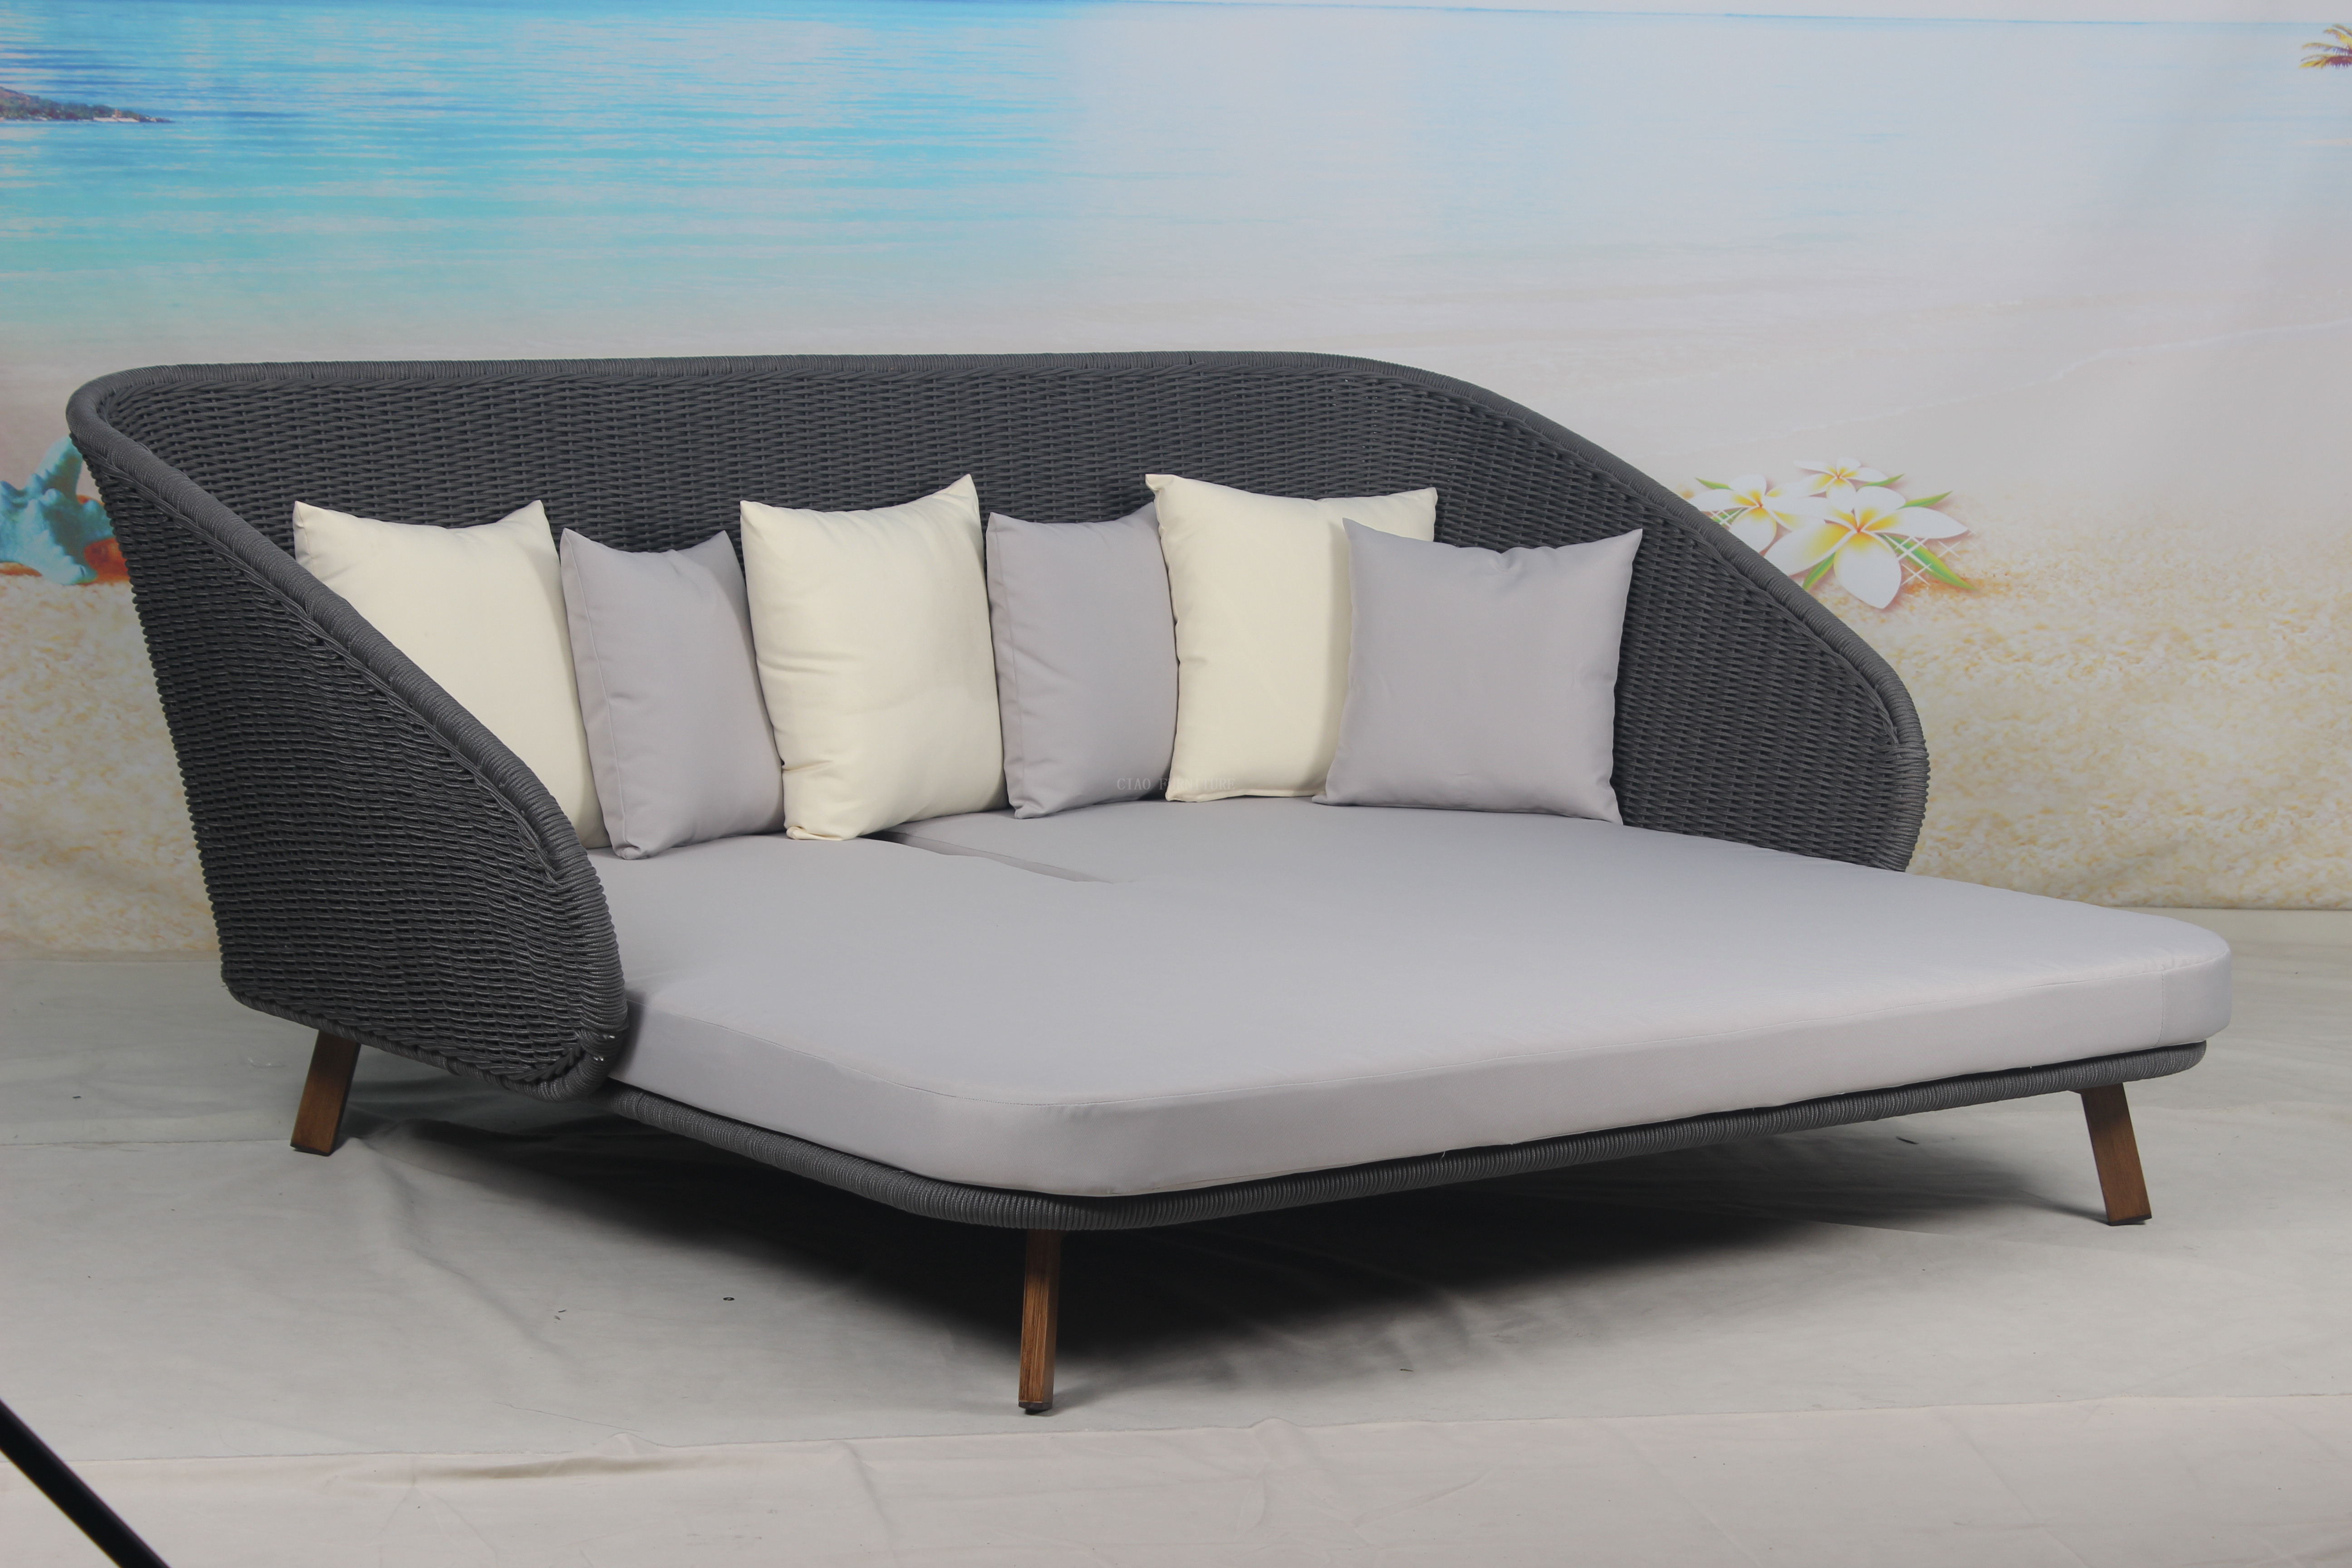 Modern outdoor patio aluminum daybed